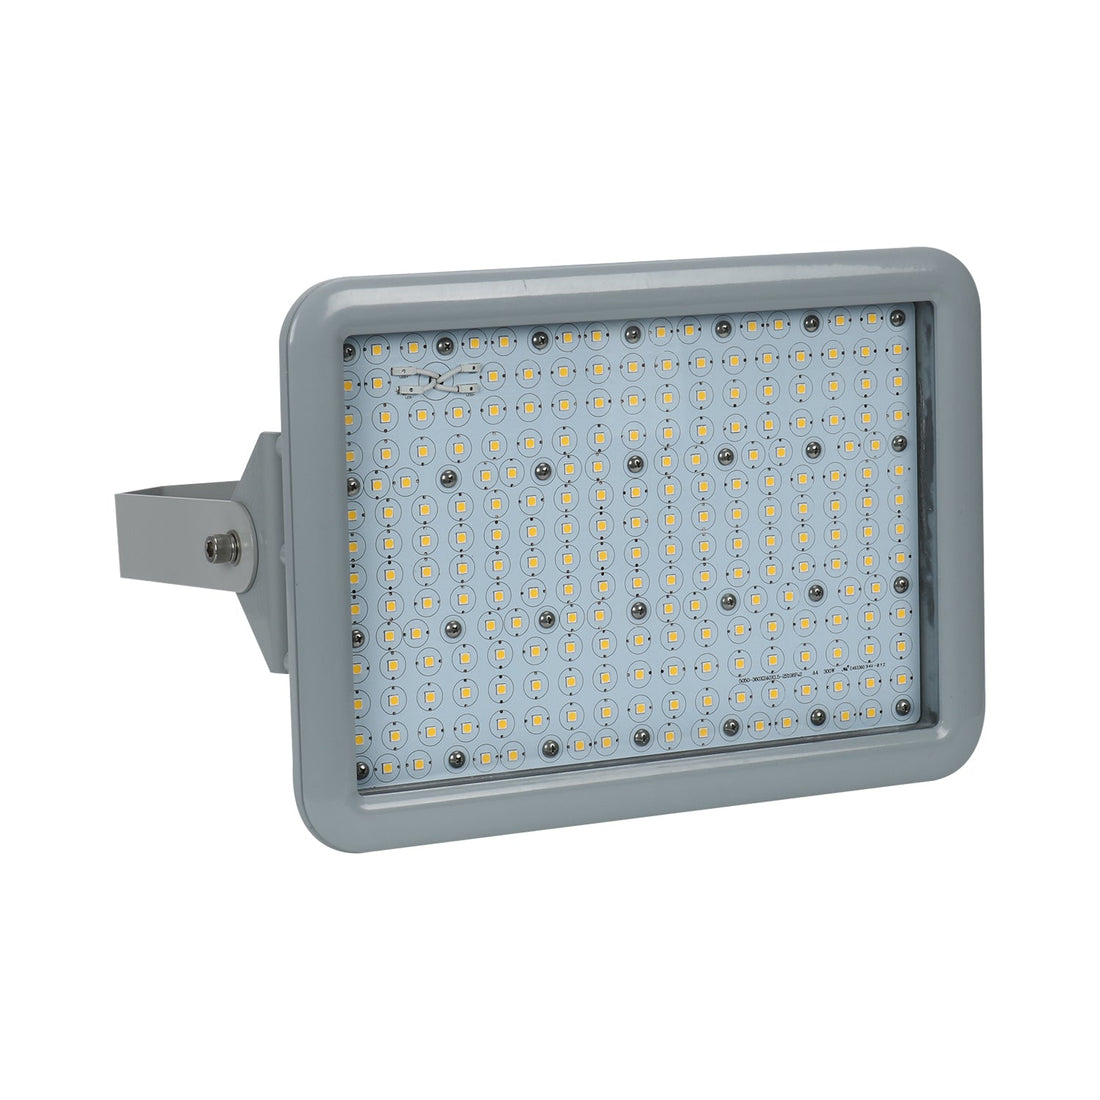 80W LED Explosion-Proof Flood Light for Hazardous Locations - Dimmable, 5000K, 10800LM, IP66 Rated, Compact and Efficient